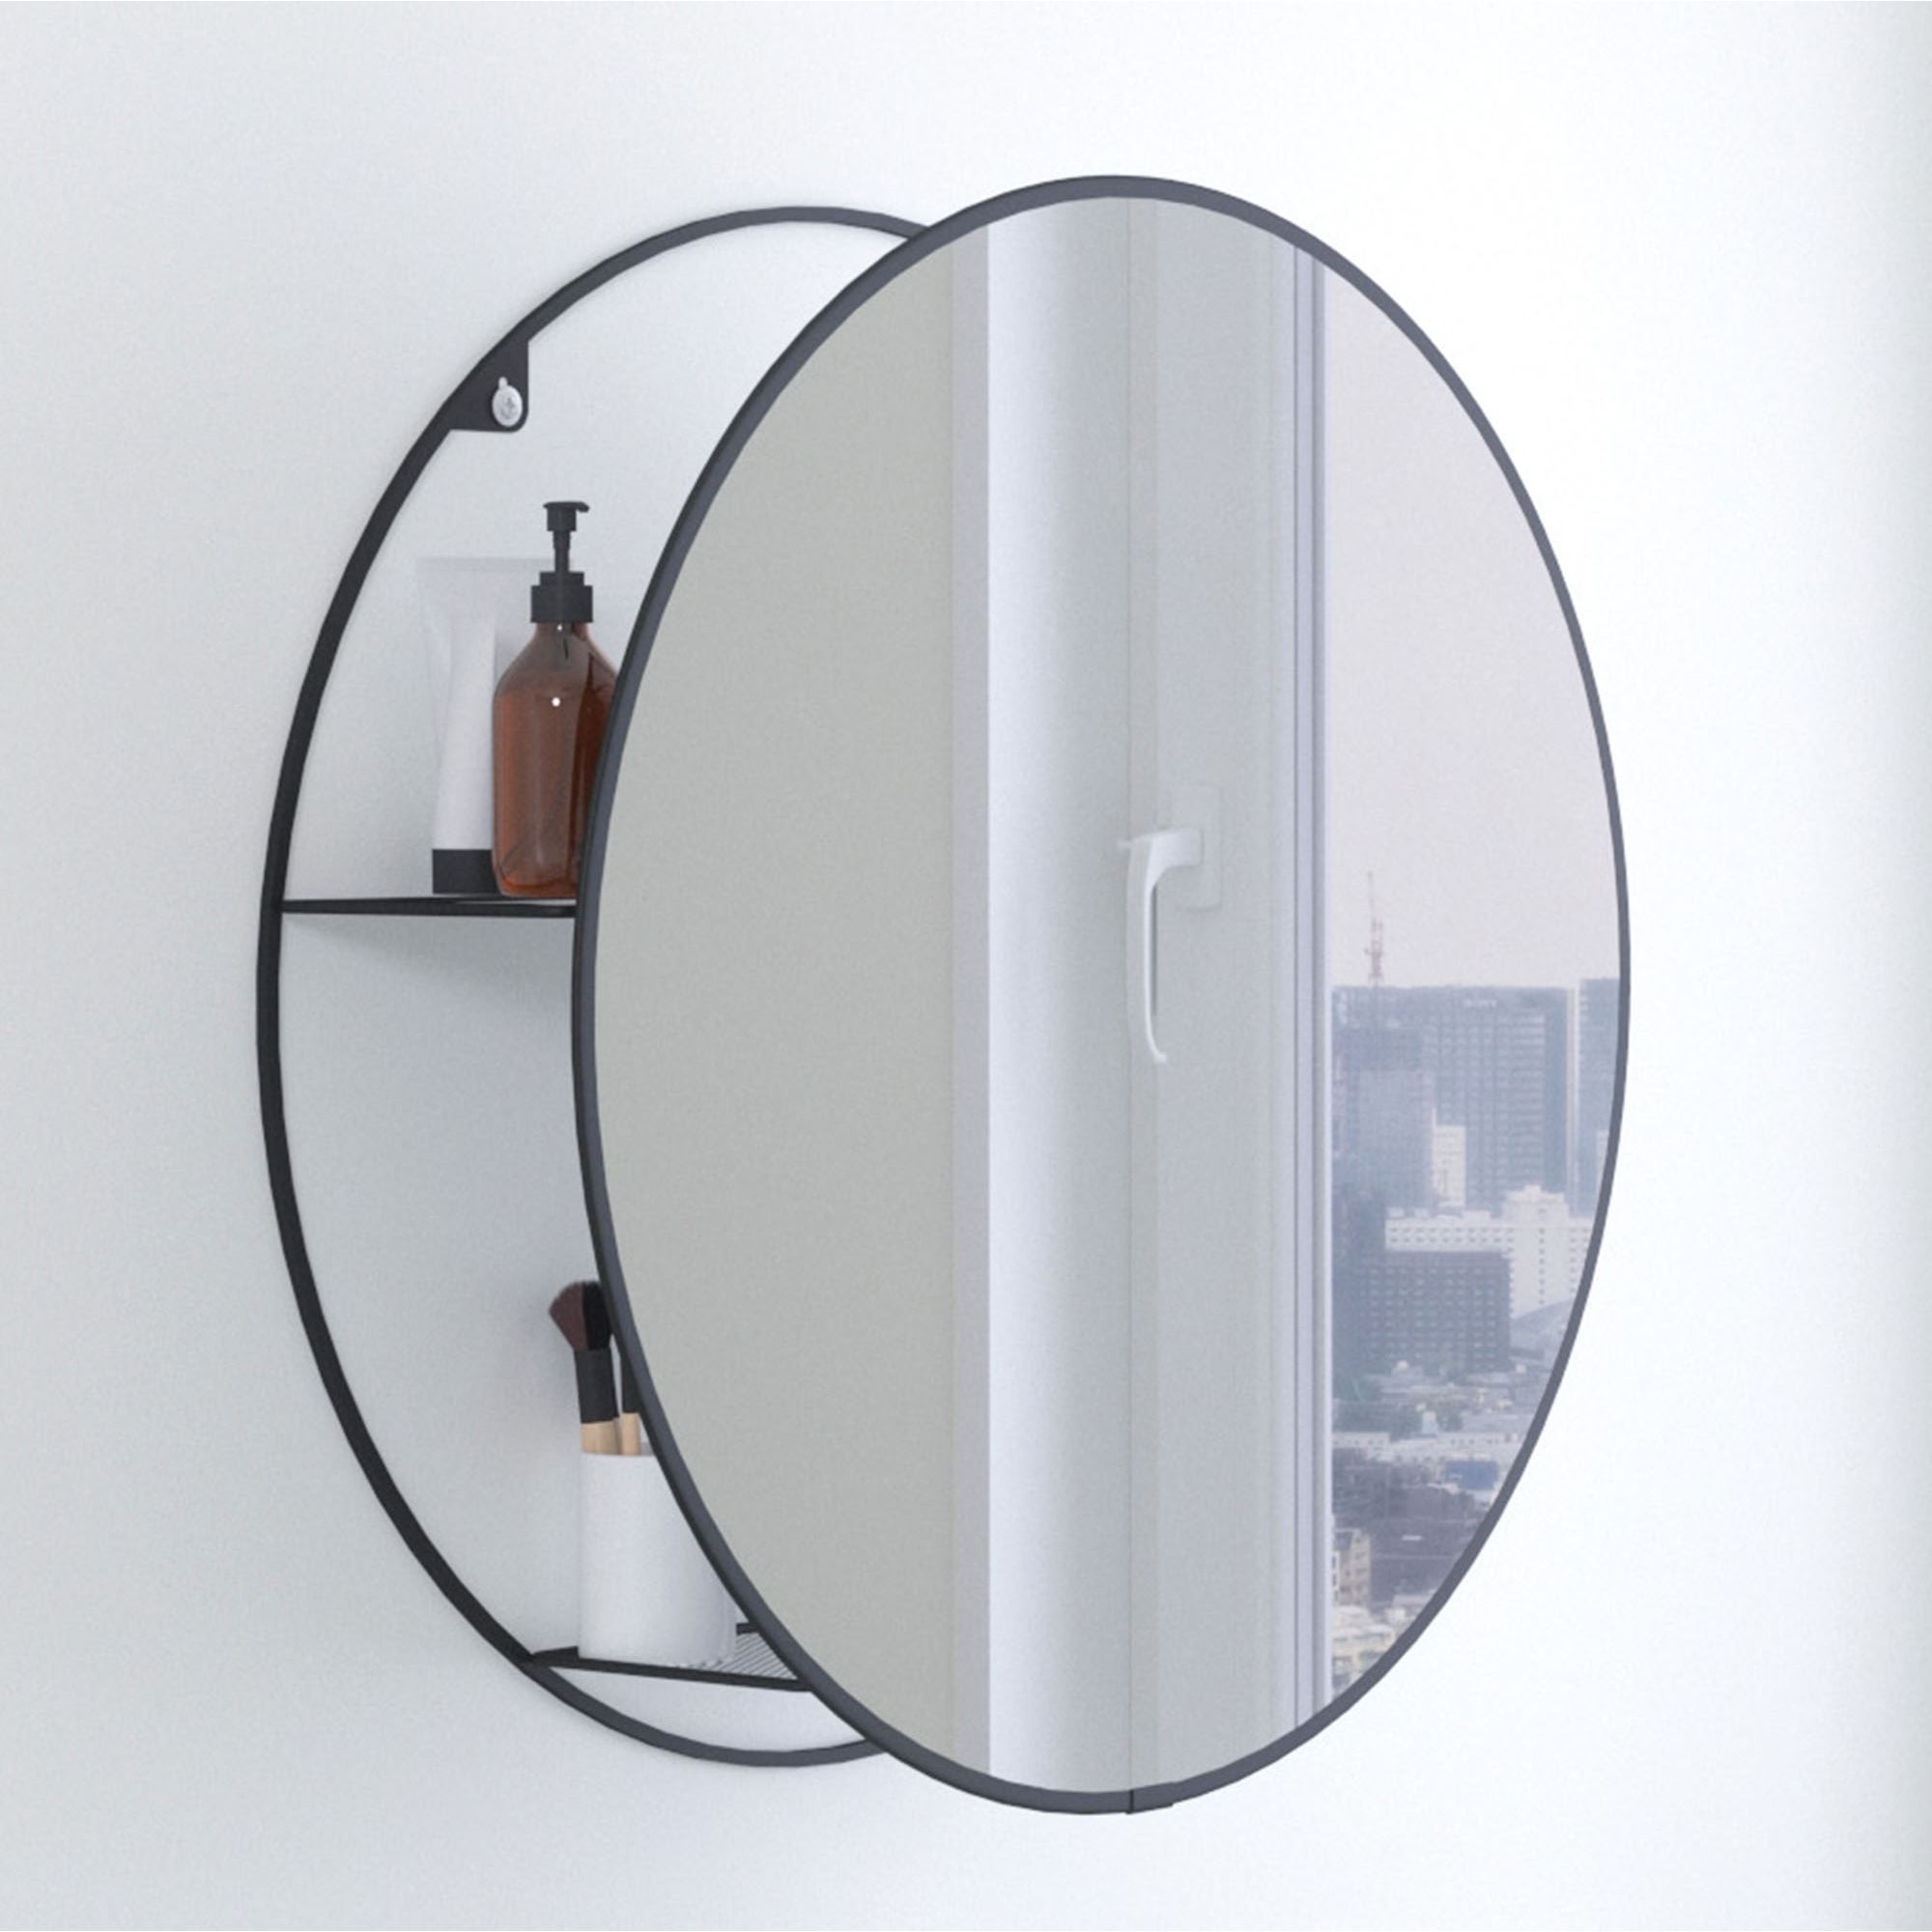 Round Storage Wall Mirror With Hidden Shelves Intended For Round Grid Wall Mirrors (View 13 of 15)